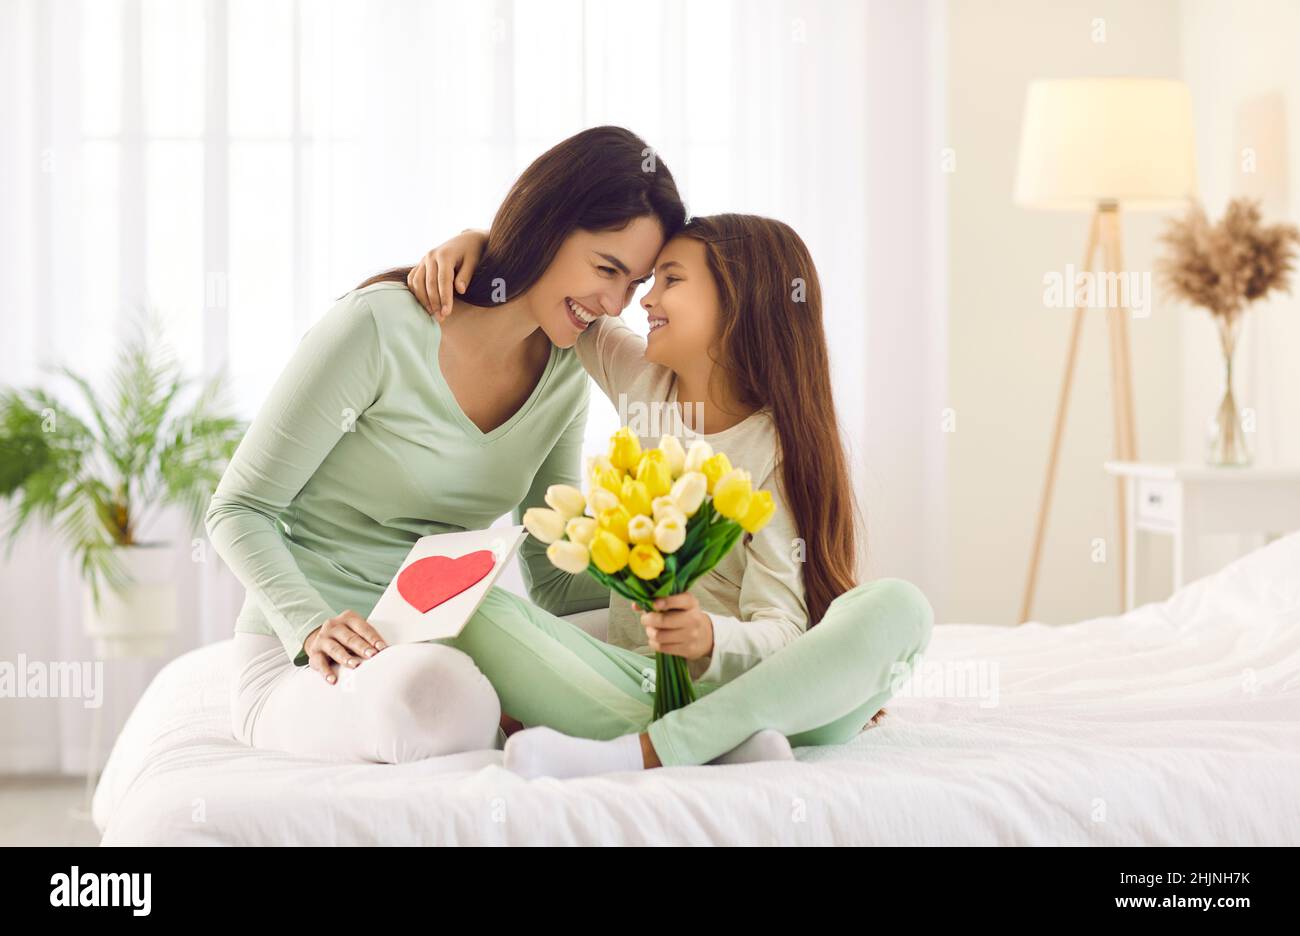 Caring small daughter greeting mom with mothers day Stock Photo